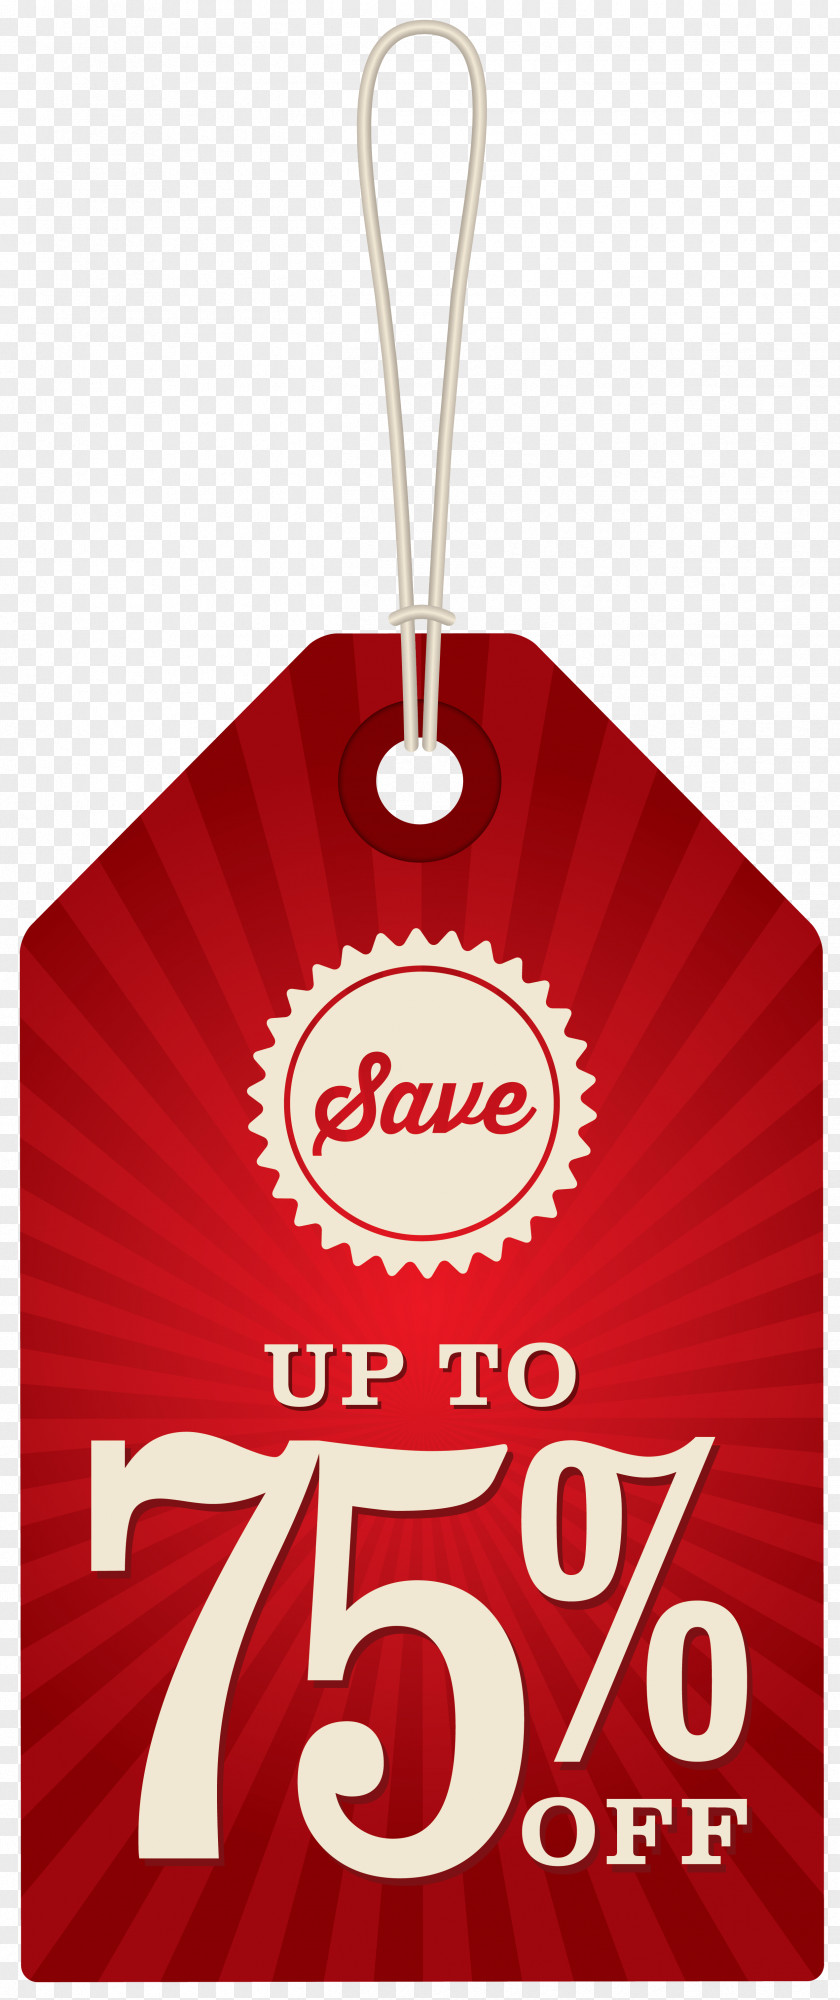 Save Up To 75% Off Label Clipart Image Clip Art PNG